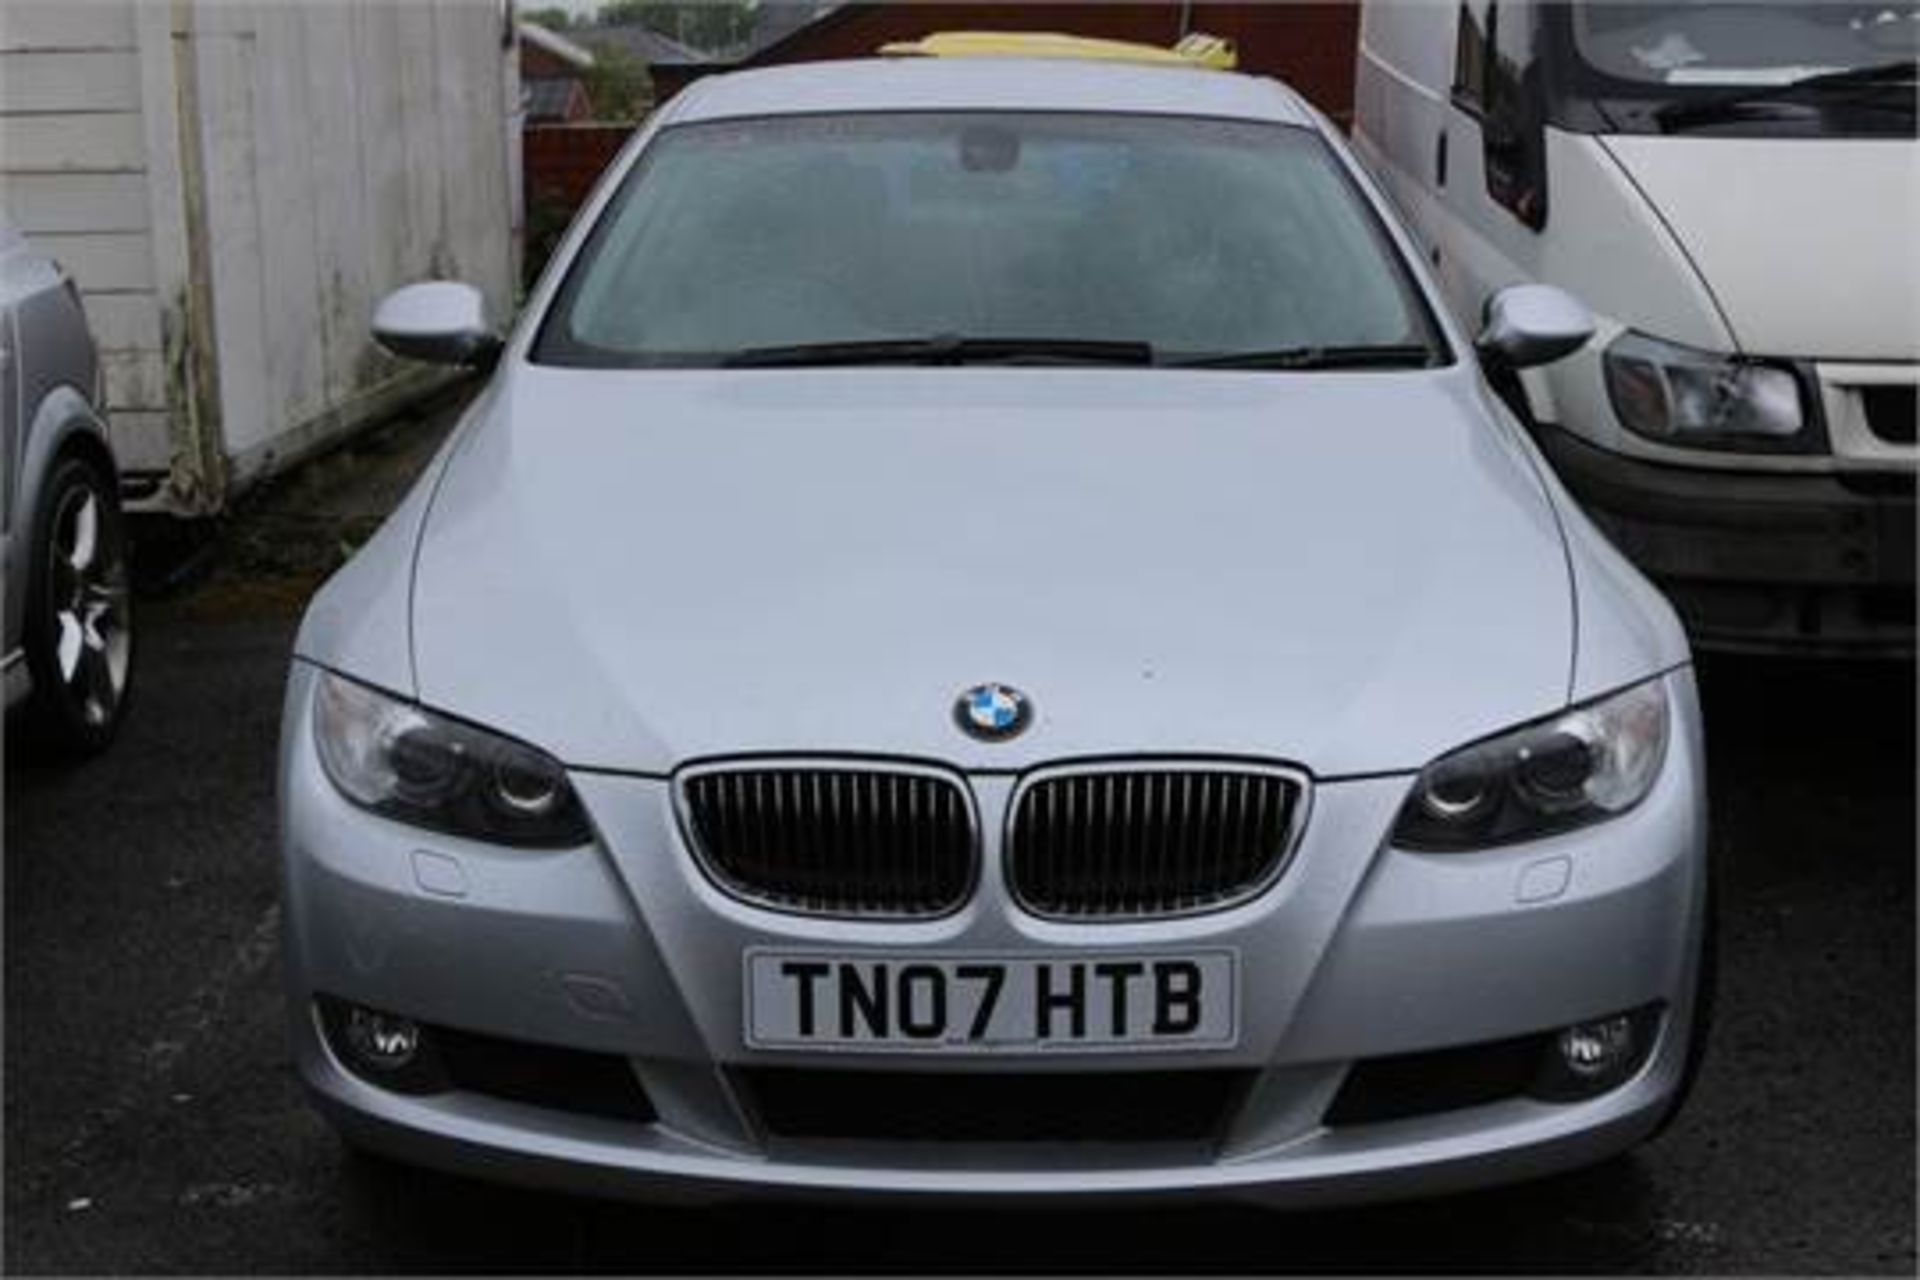 BMW, 330 SE COUPE, TN07 HTB, 3-0 LTR, PETROL, AUTOMATIC, 2 DOOR COUPE, 25.05.2007, CURRENT